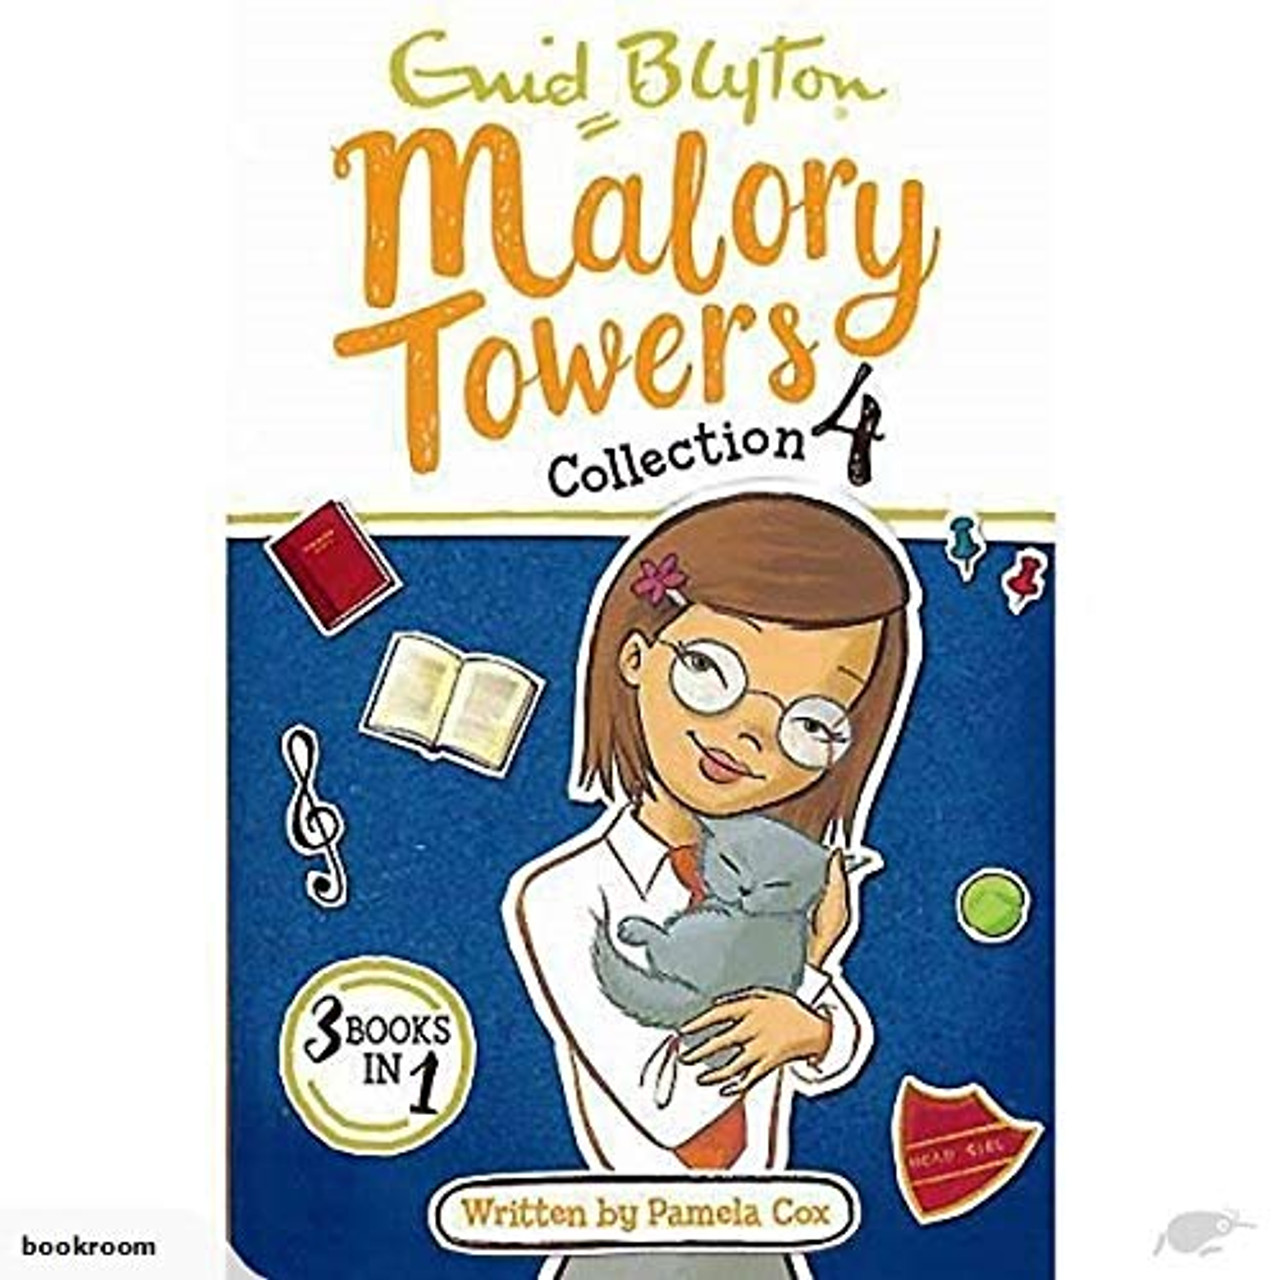 MALORY TOWERS COLLECTION 4 PB